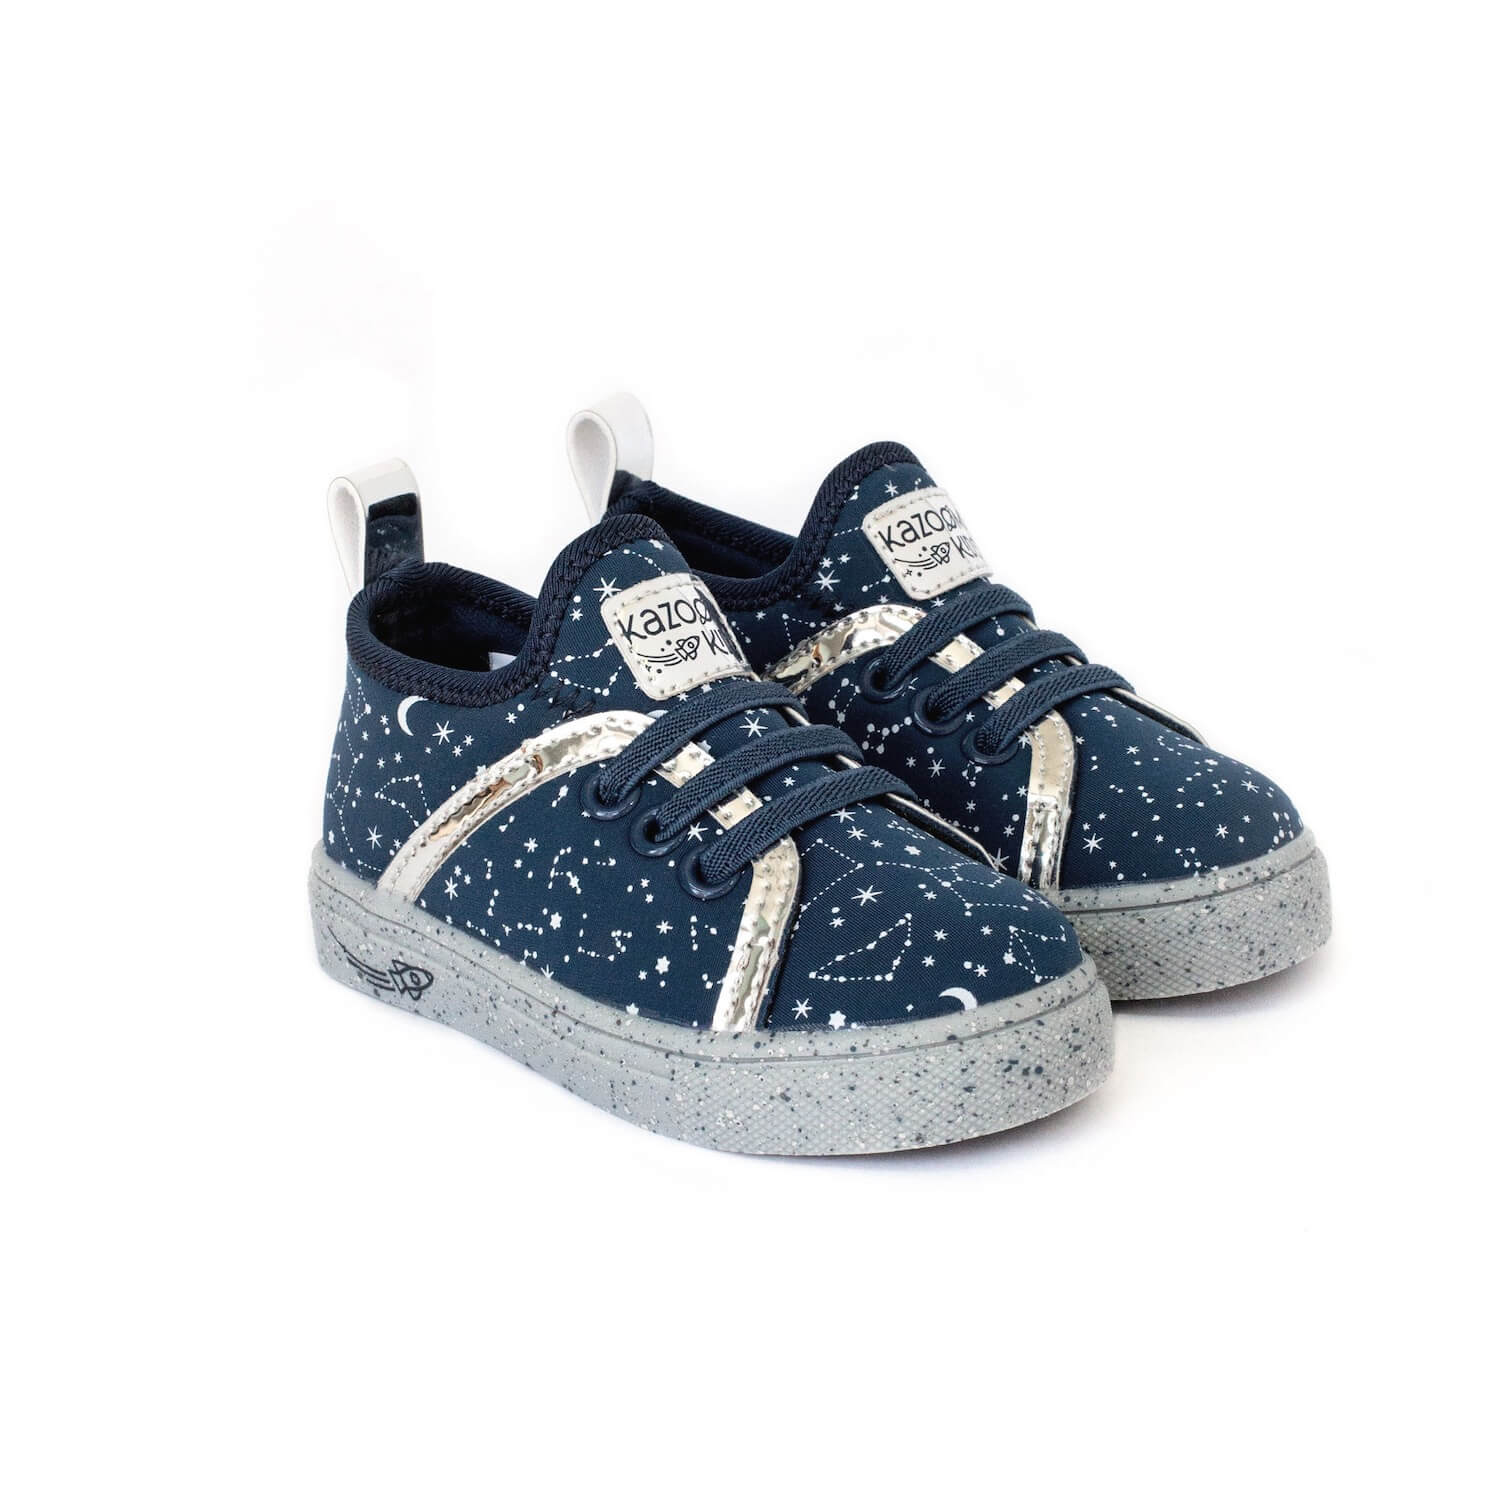 Girls and boys kids shoes - Constellation and Stars kids shoes